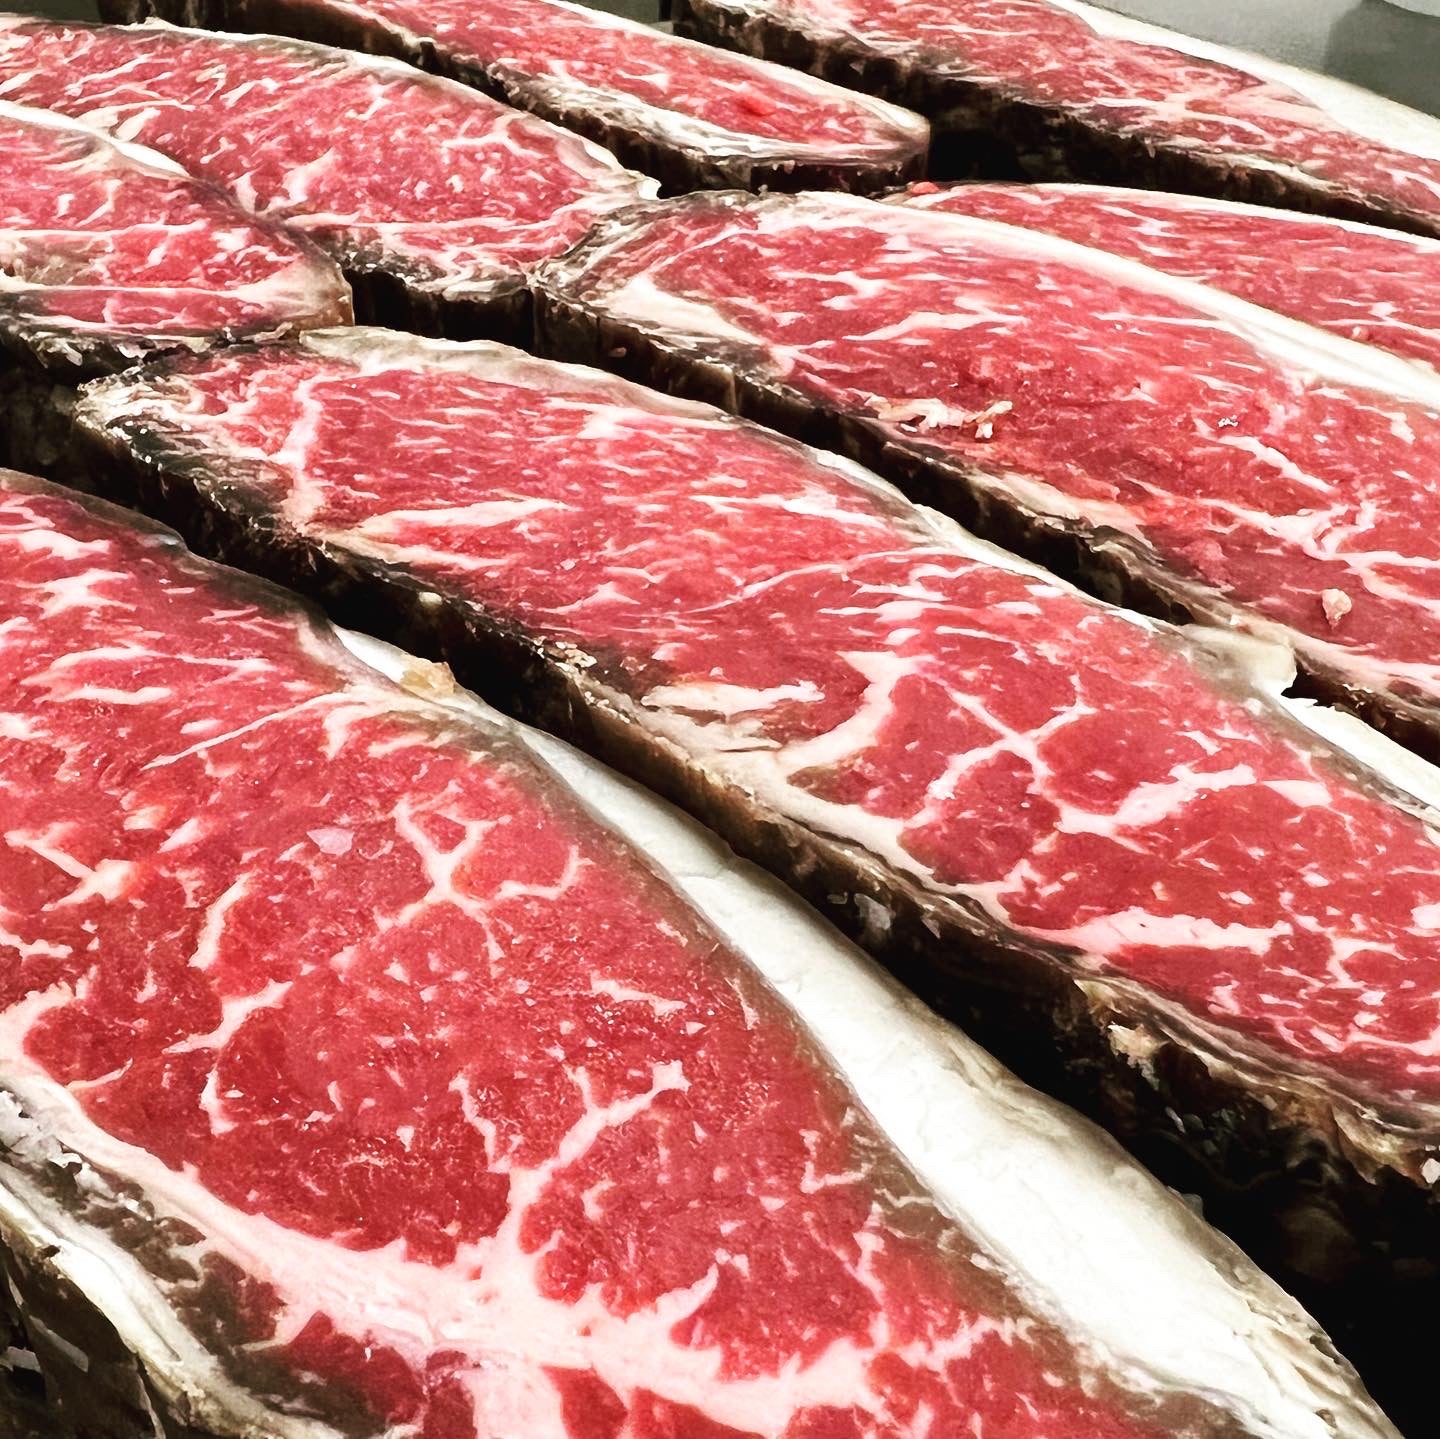 [Sold Out] 40 Days Dry Aged Sirloin [USDA Prime] 